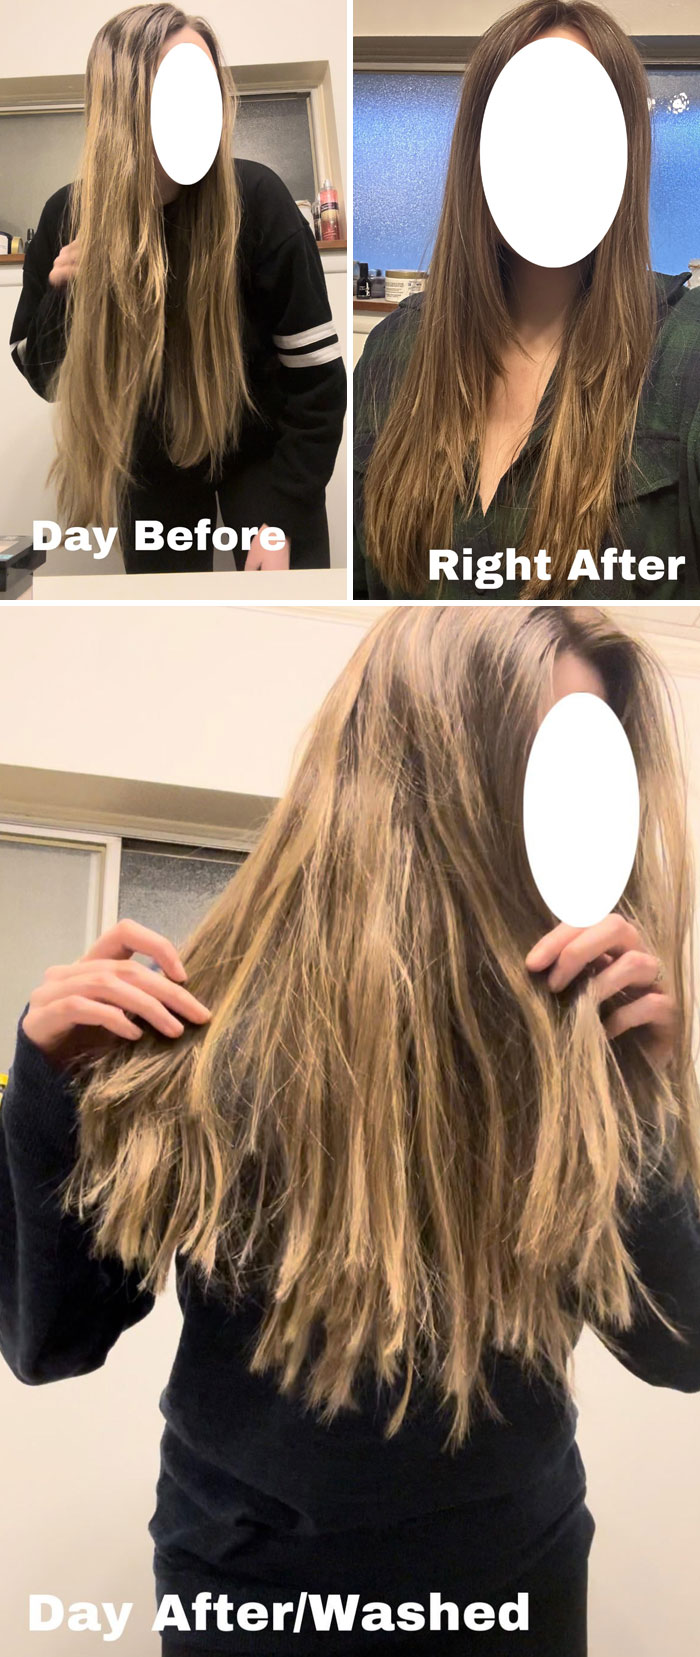 Hairstylist Told Me Layers Are Supposed To Look This Way… Am I Crazy For Thinking This Looks Weird/Bad?